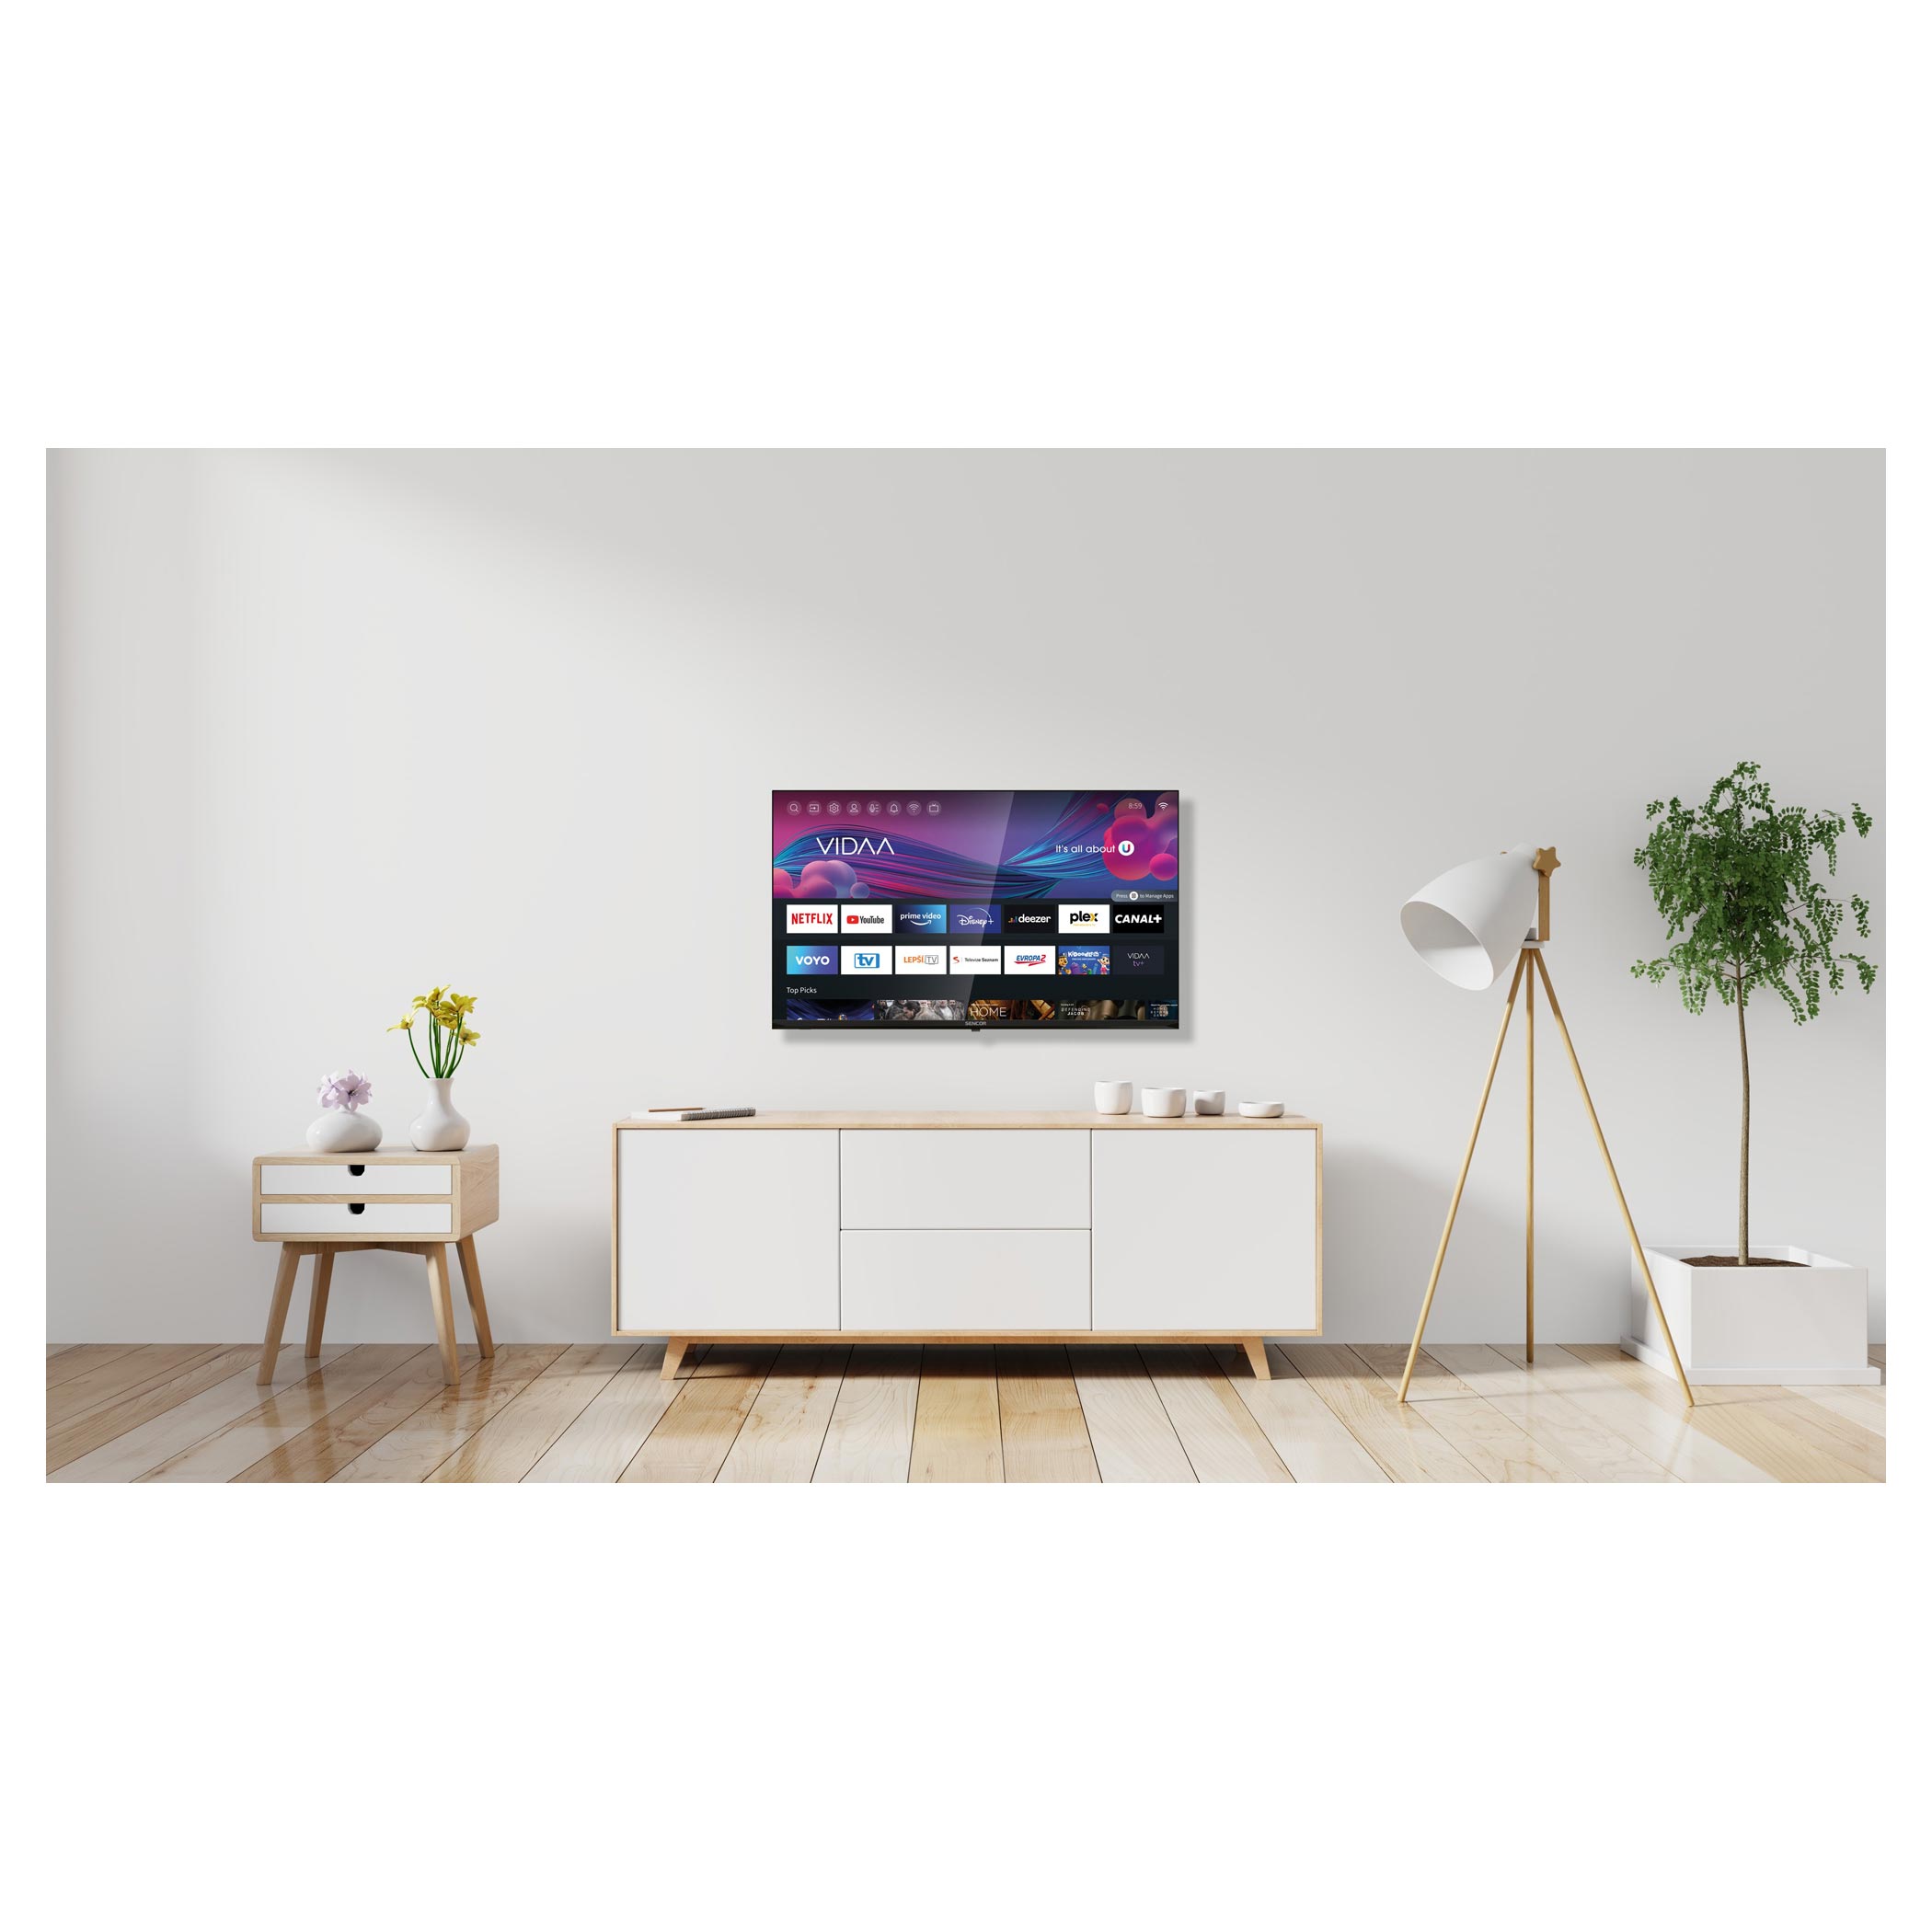 SMART television, SLE 32S801TCSB